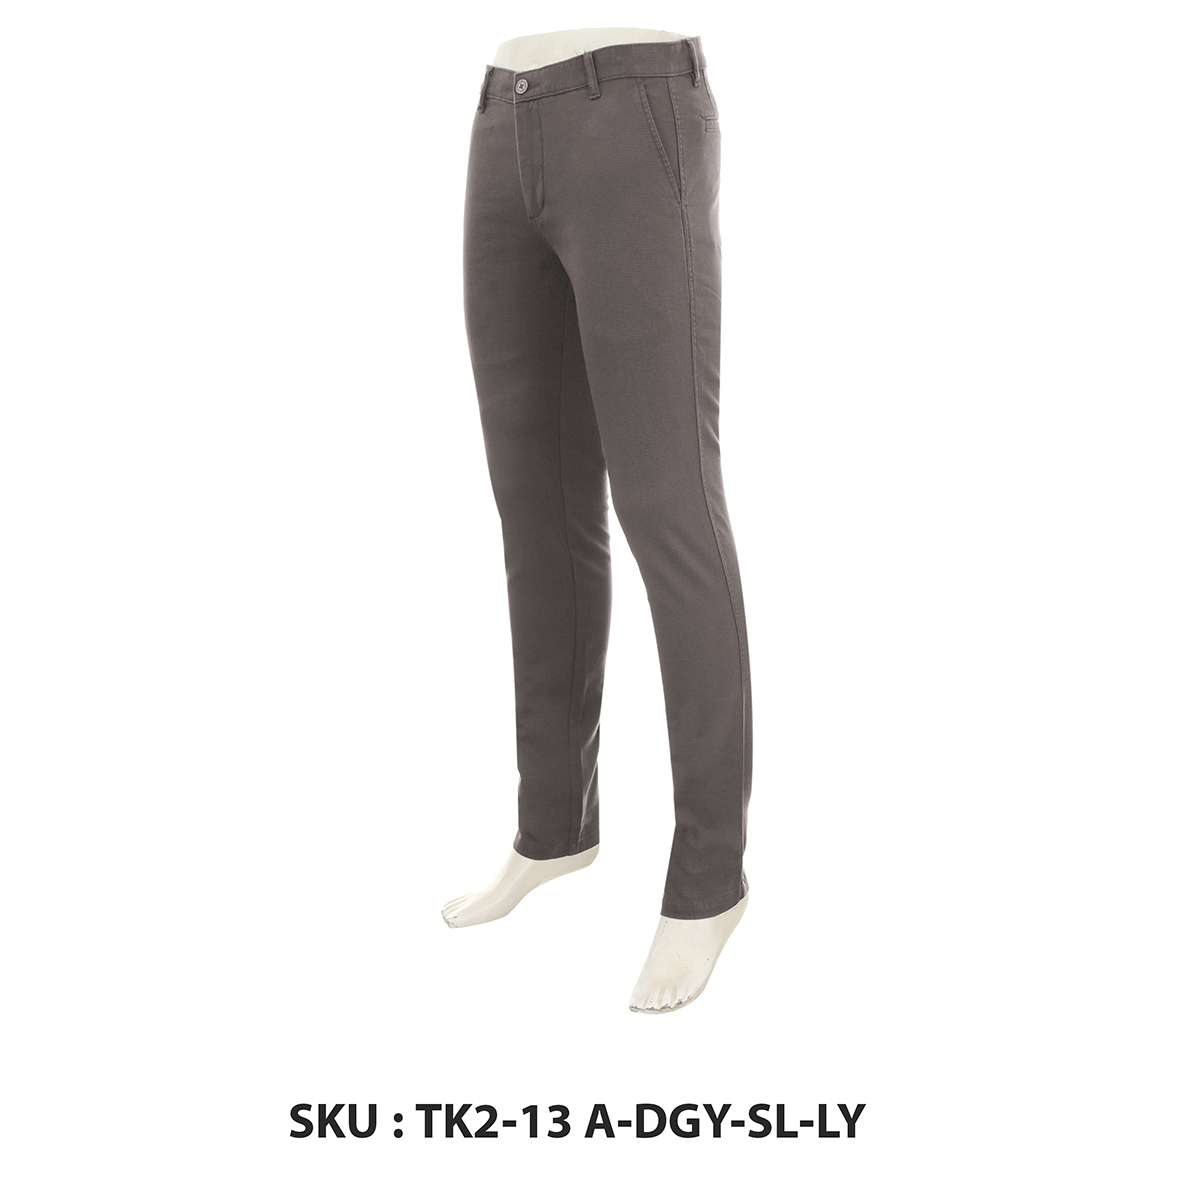 Classic Polo Mens Trousers Tk2-13 A-Dgy-Sl-Ly Grey 32